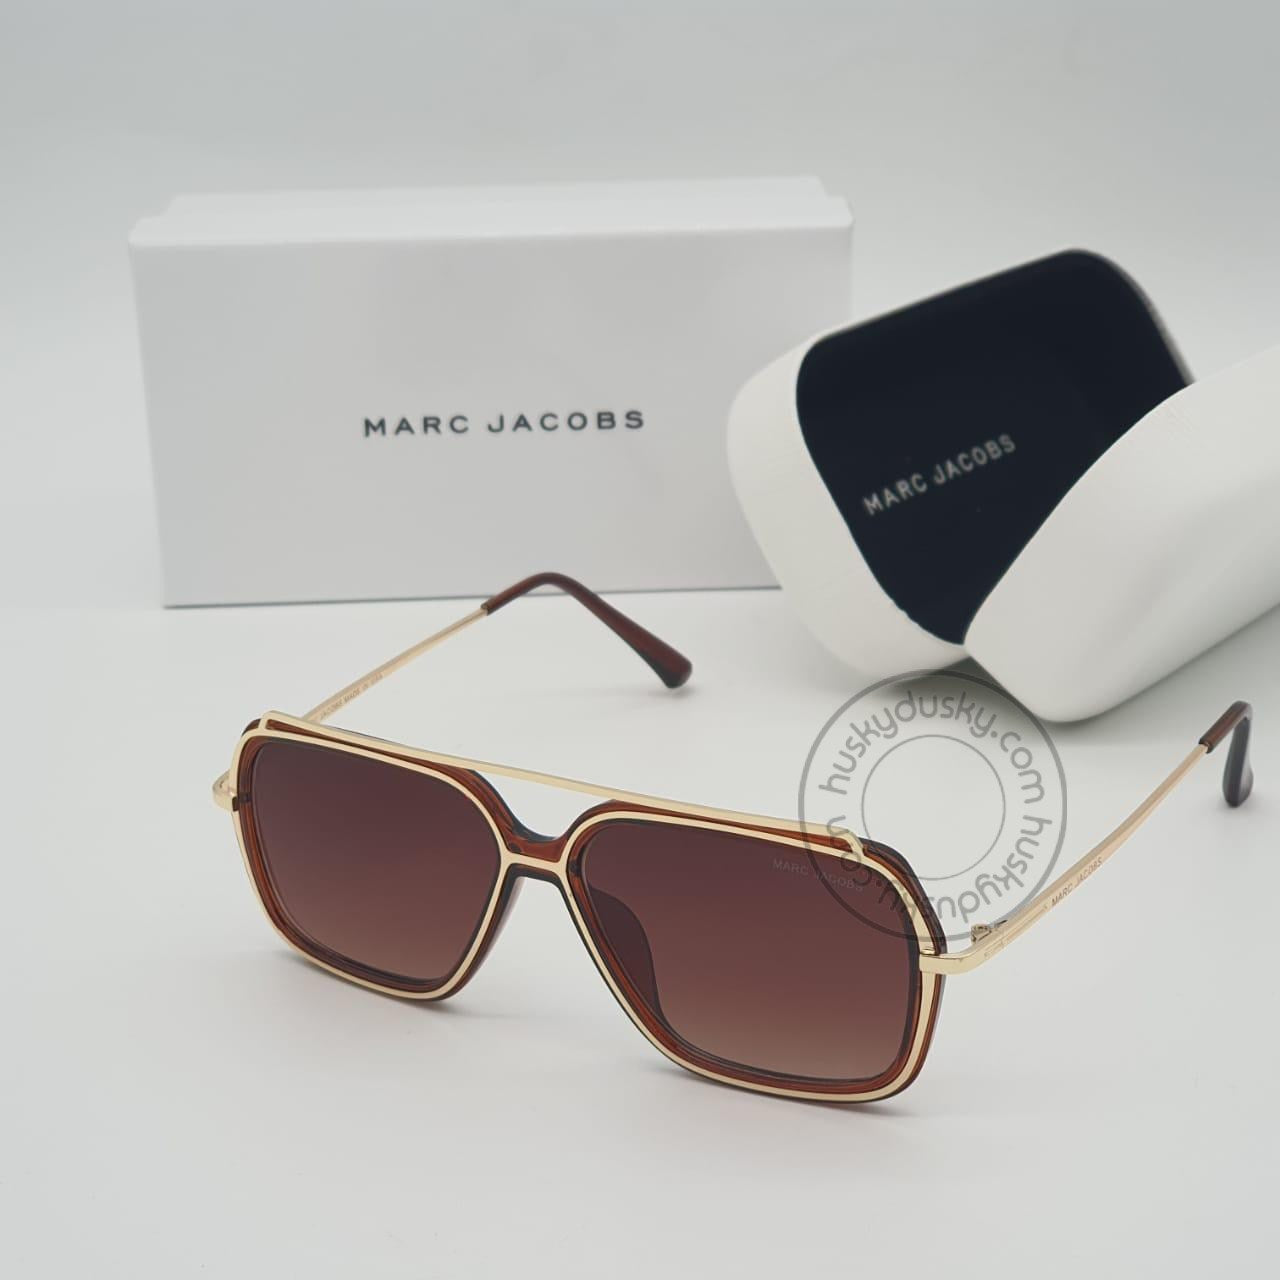 Marc Jacobs Branded Brown Glass Men's Sunglass For Man MJ-75 Brown & Gold Stick & Frame Gift Sunglass